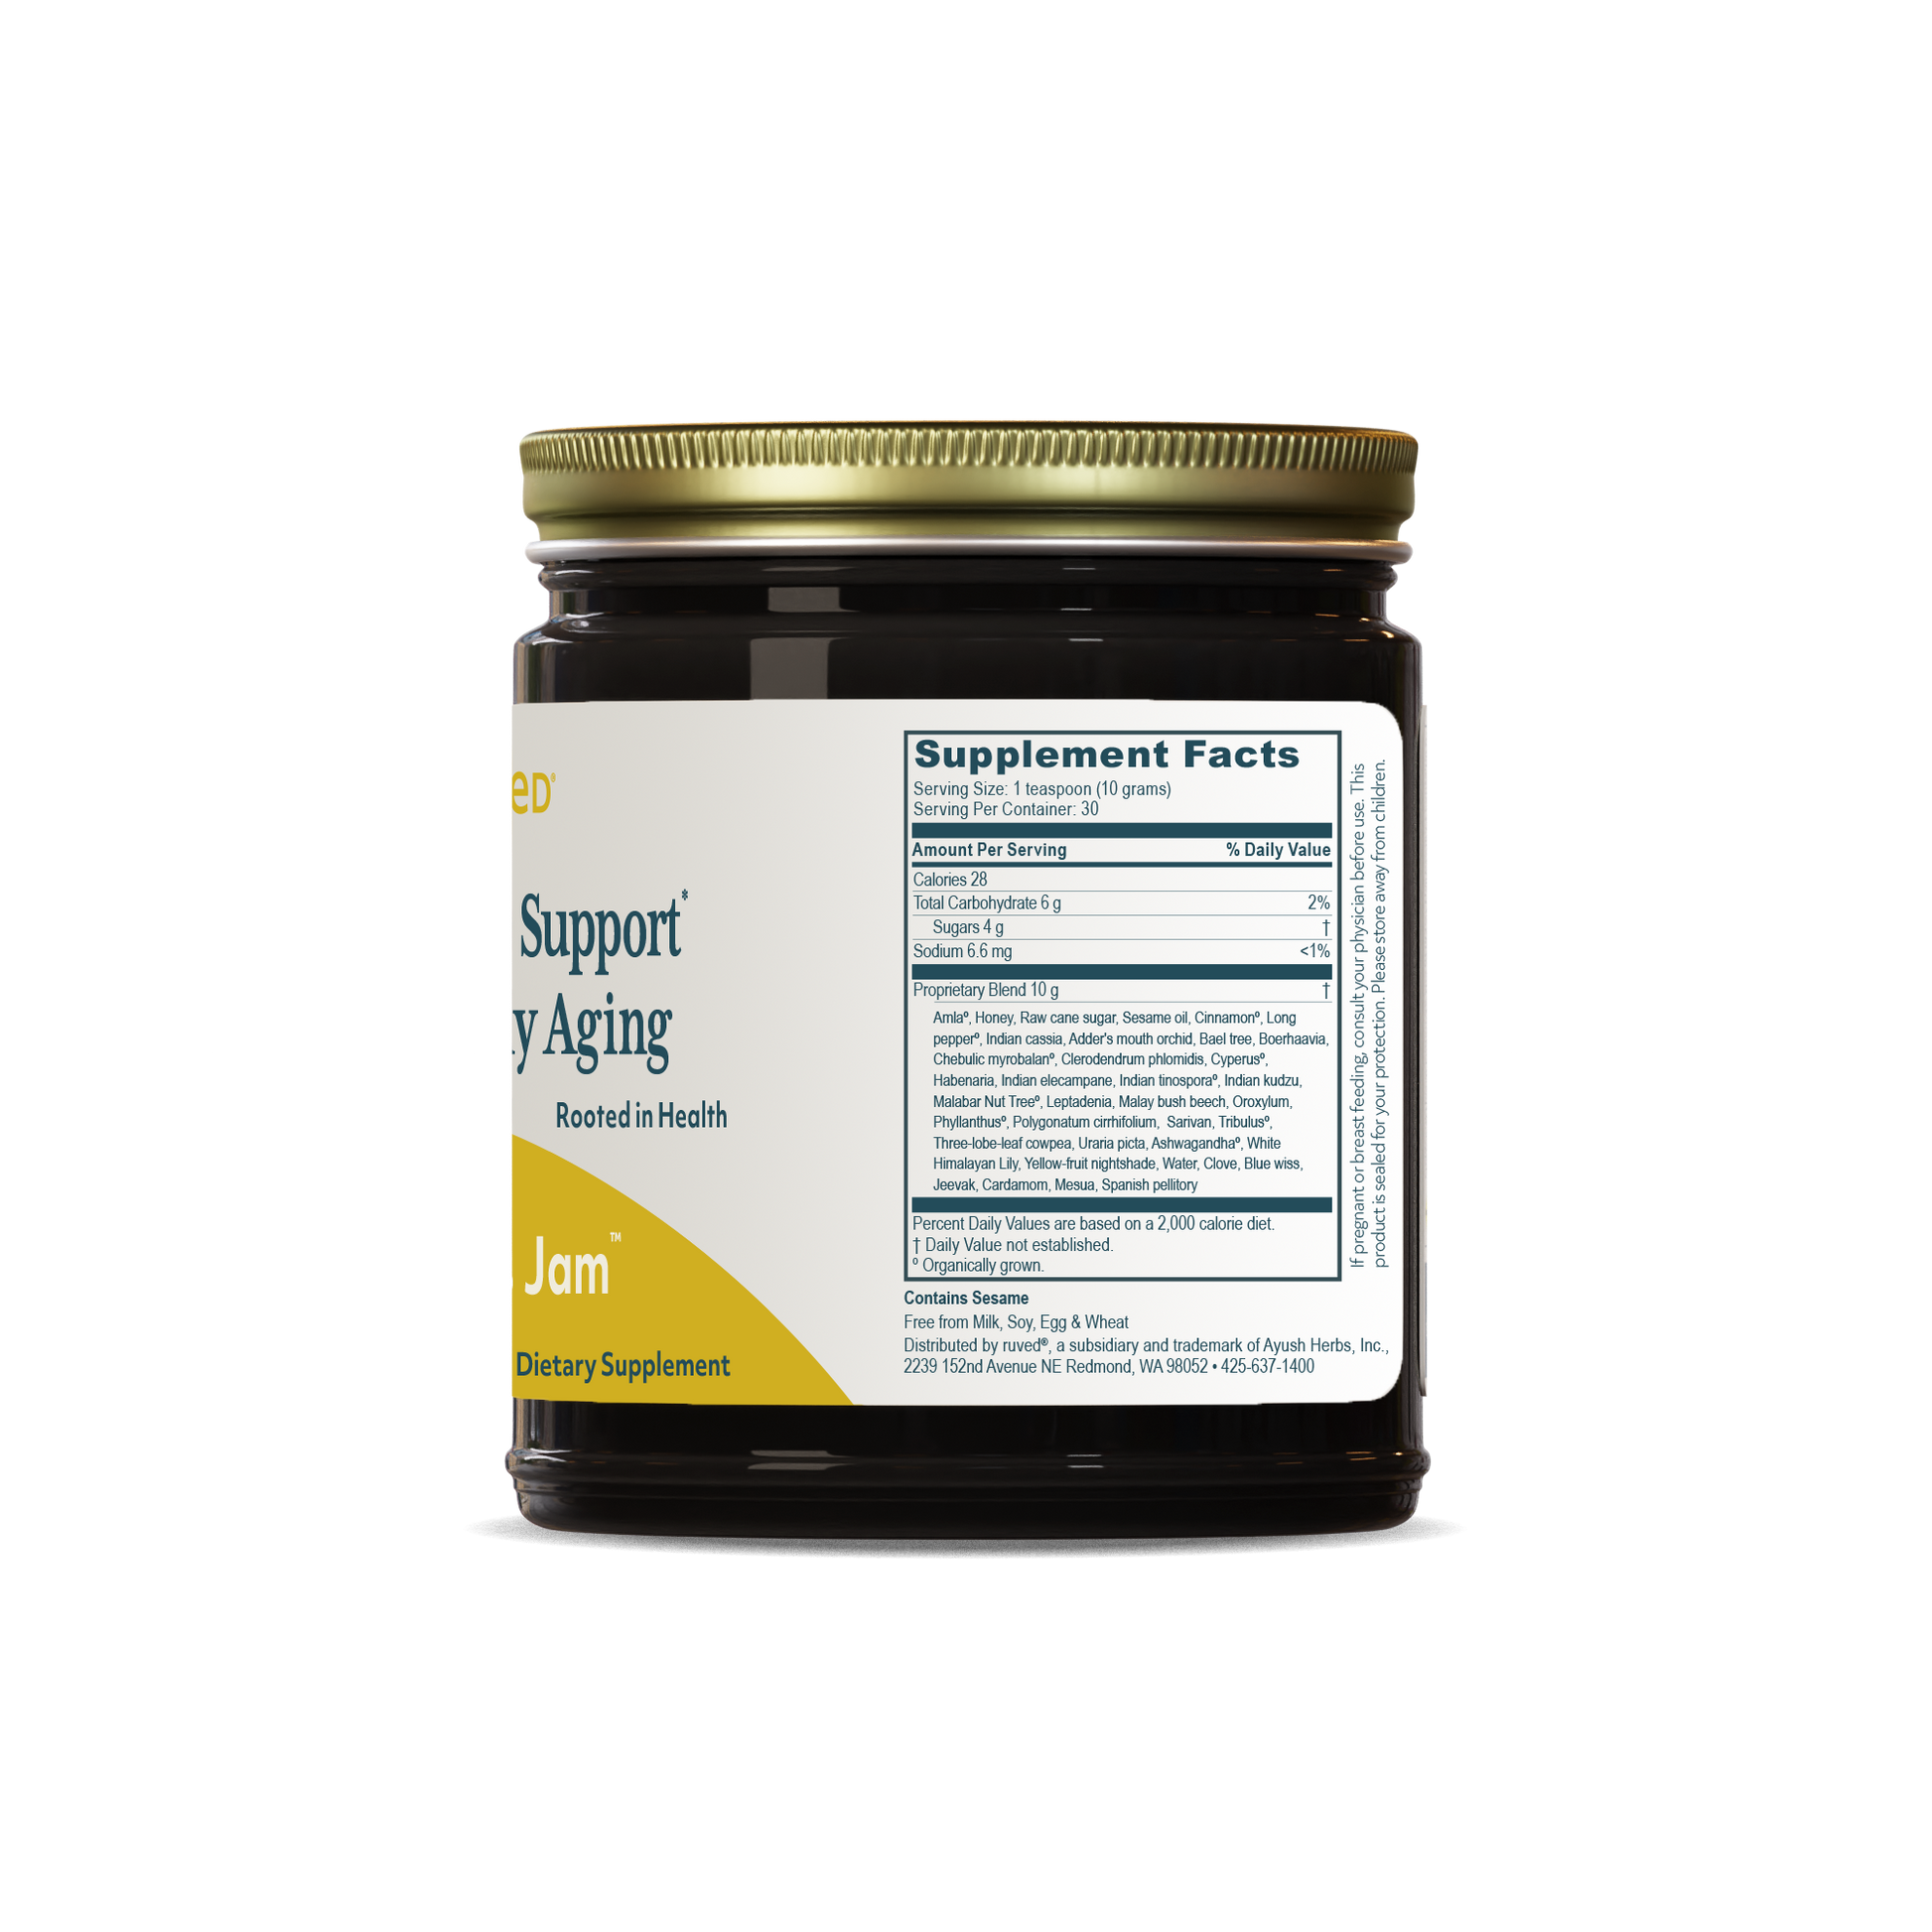 Wellness Jam Jar Supplement Facts Side - Finely crafted antioxidant-packed jam for Day Nourishment - 300 gm Jar, Perfect for Immune Support + Healthy Aging with ingredients like Honey and Amla.